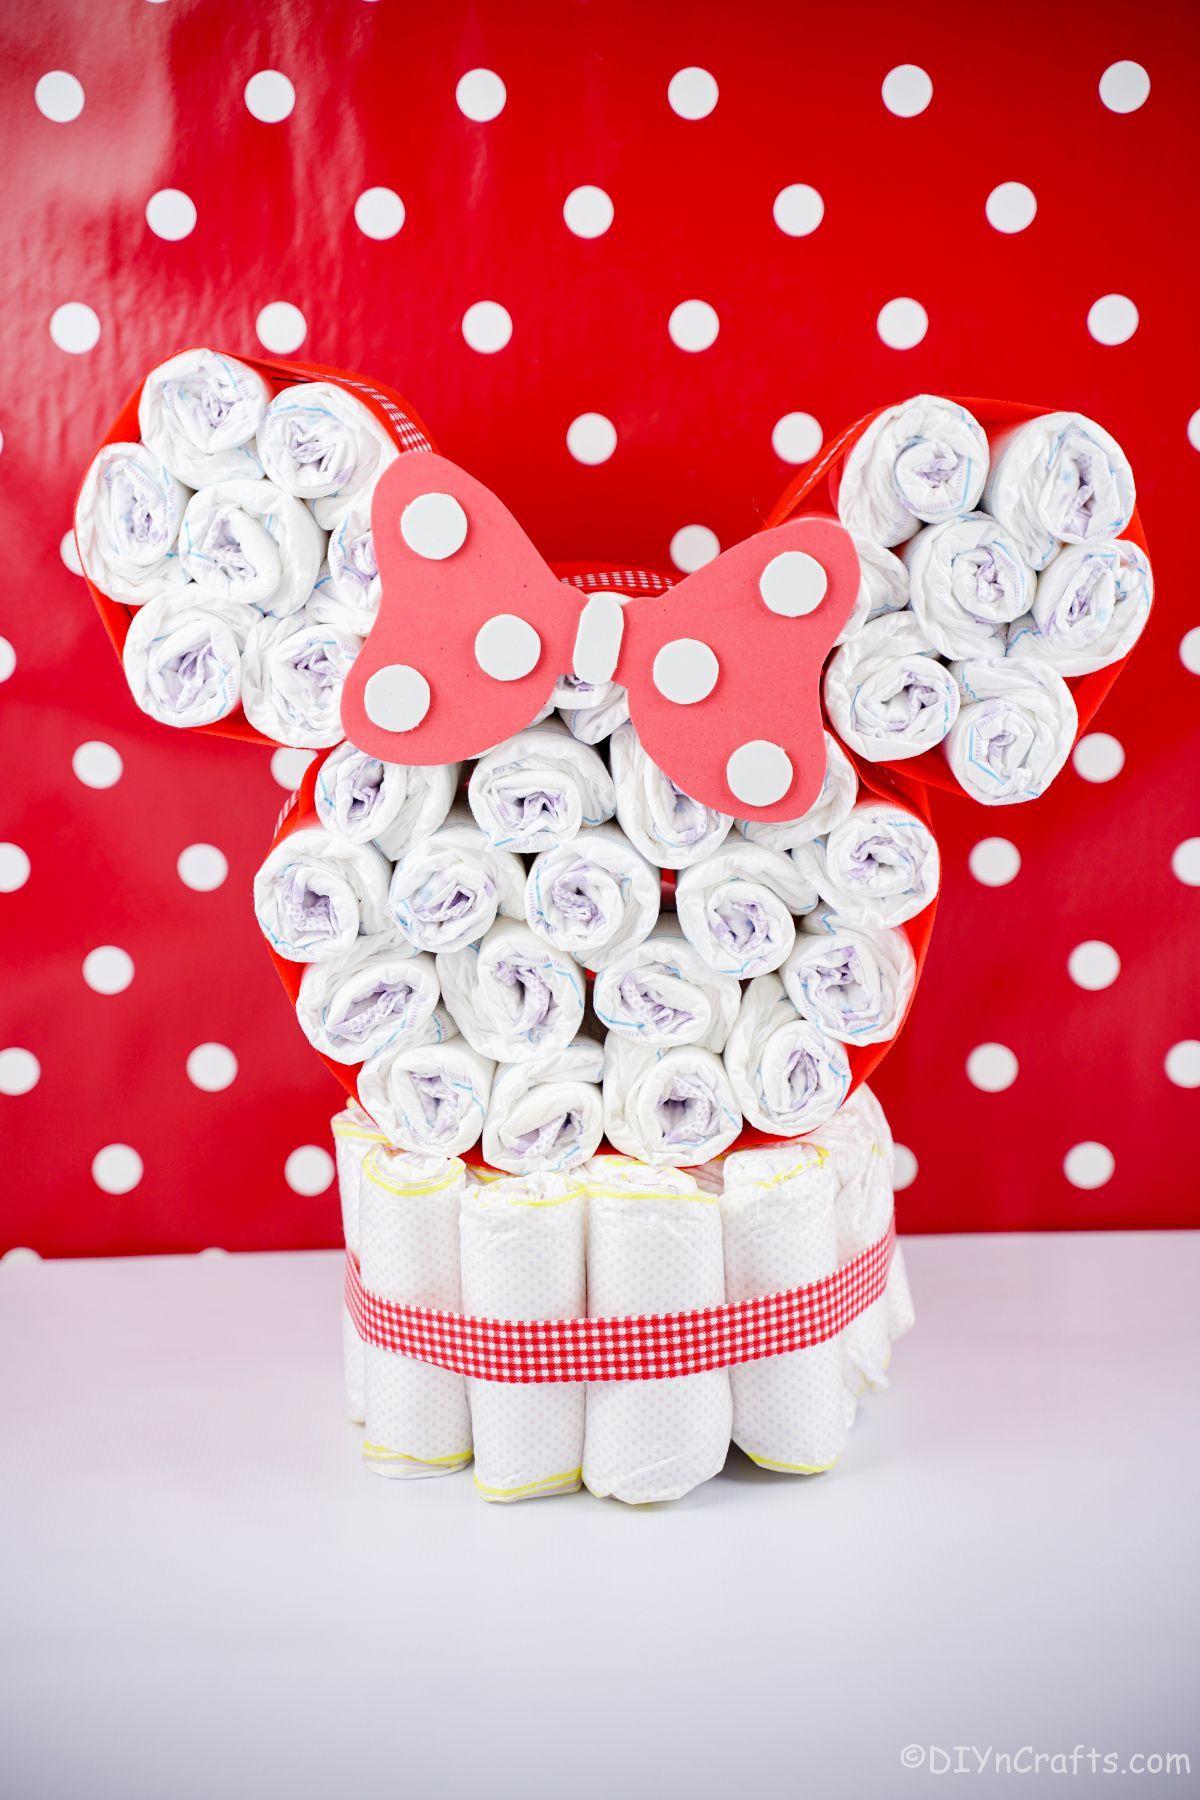 Minnie Mouse diaper cake in front of red and white polka dot wall